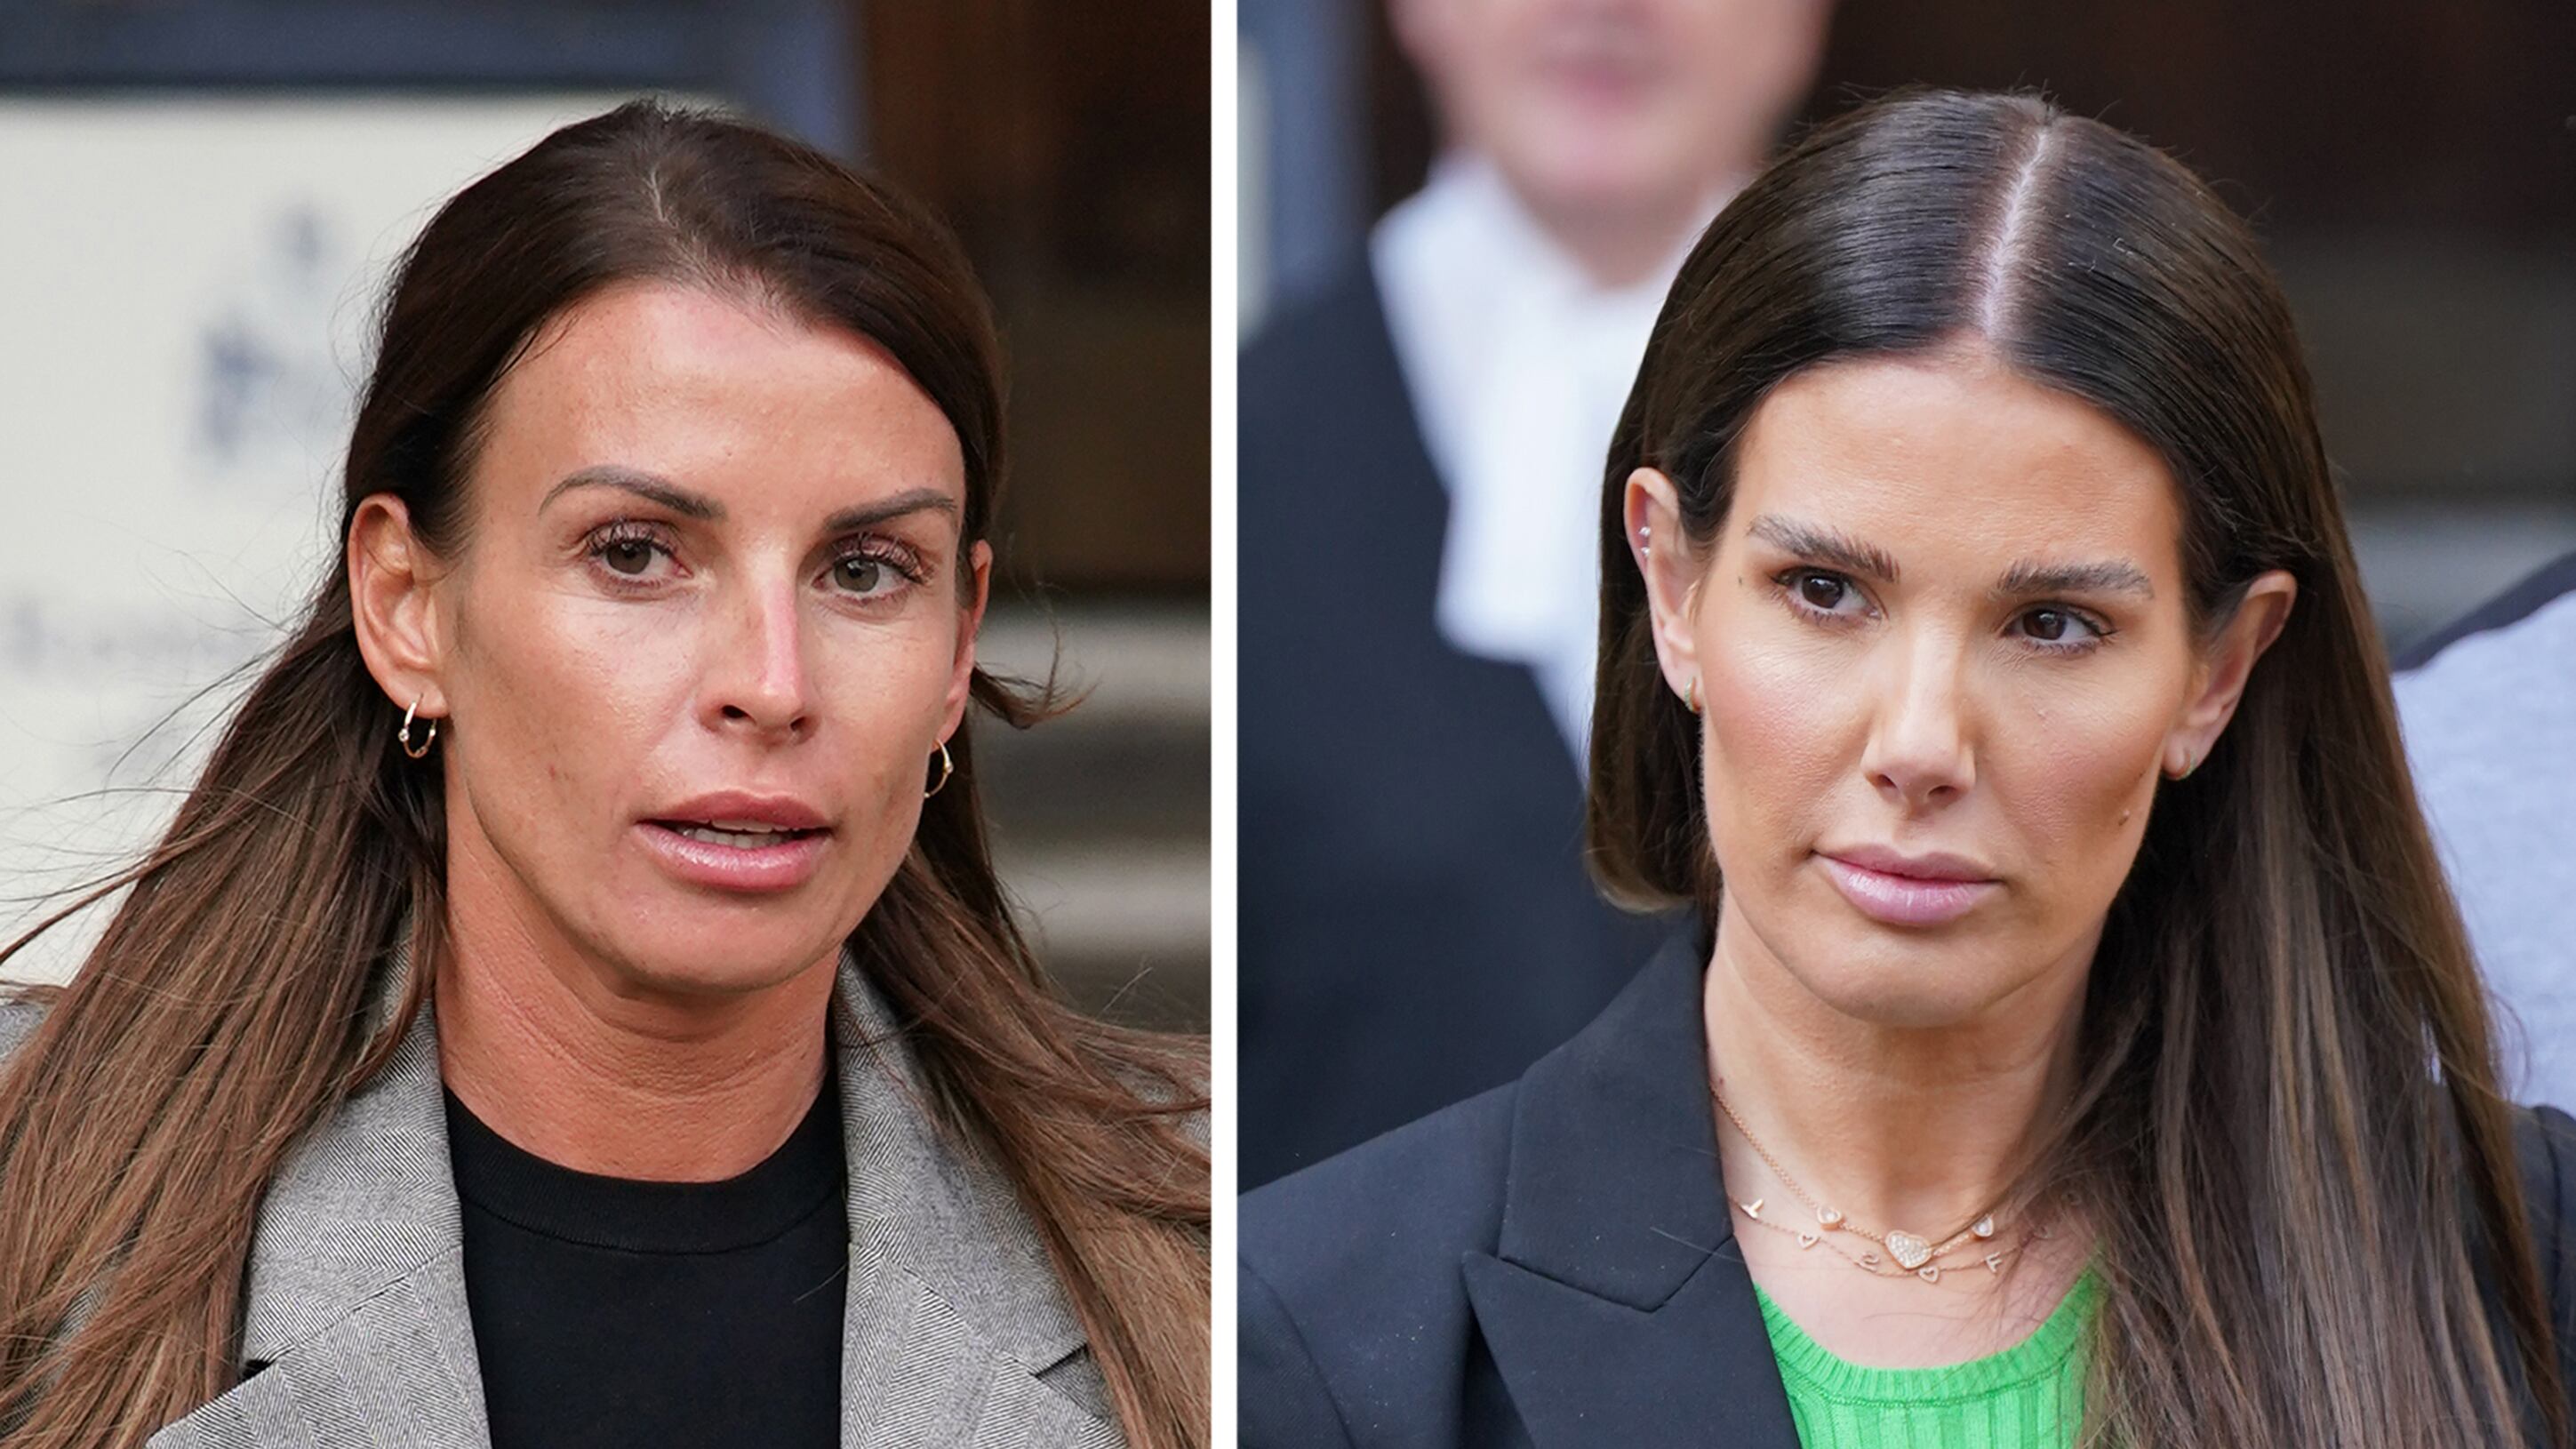 Coleen Rooney (left) and Rebekah Vardy were involved in a libel case